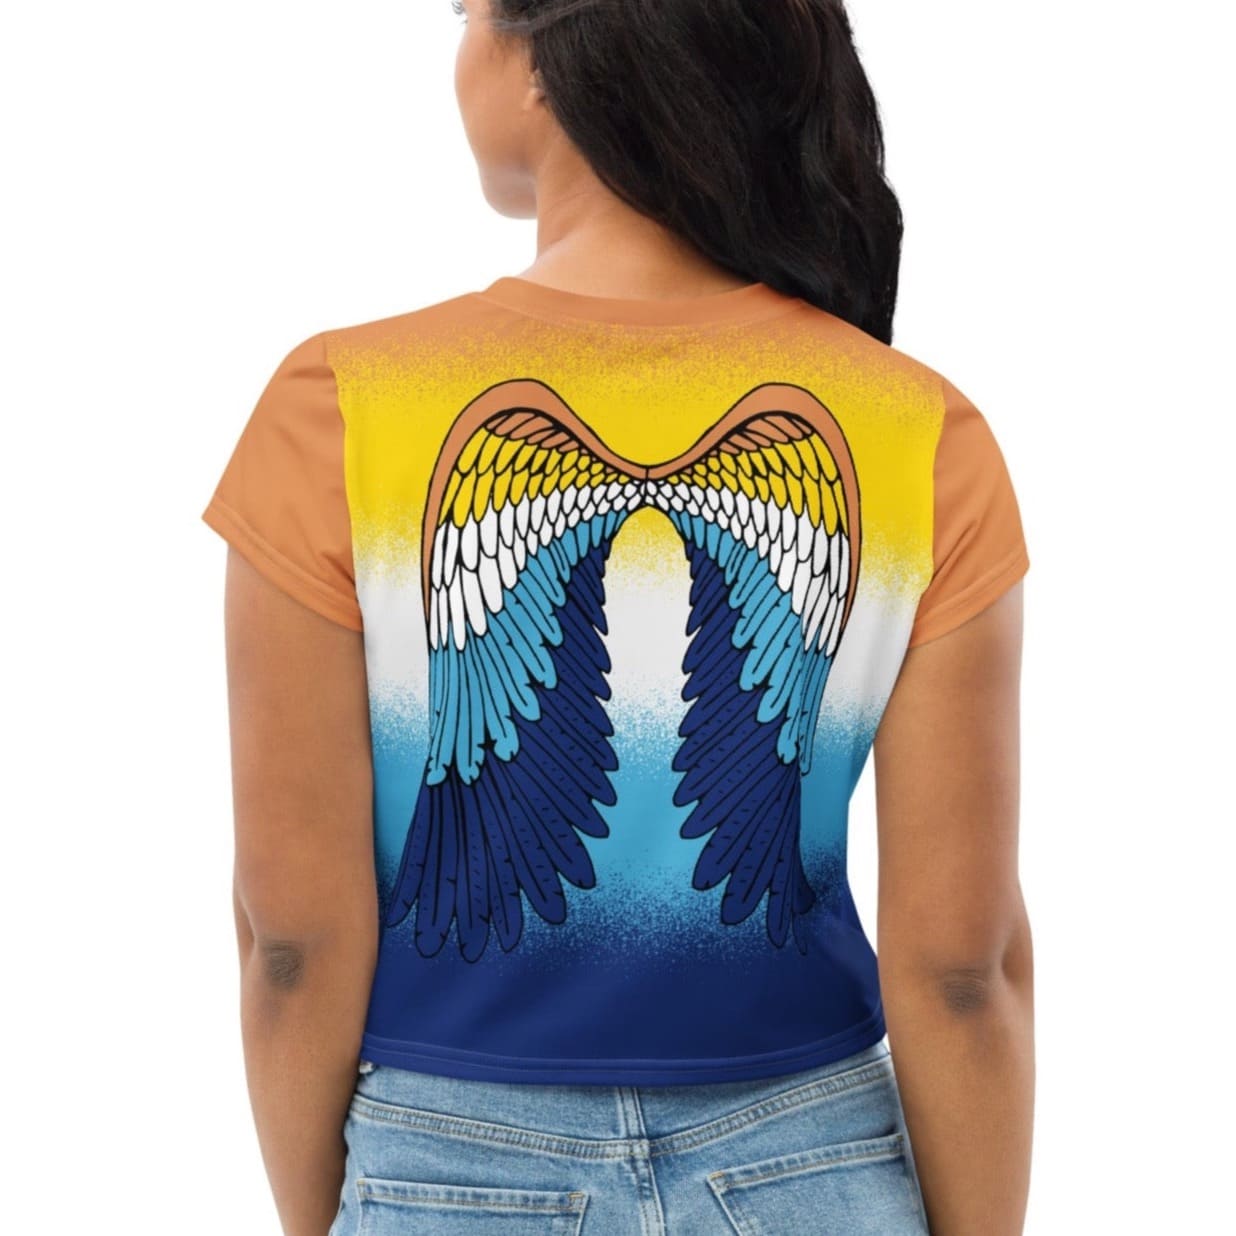 aroace crop top, aro ace pride cropped shirt with wings on back